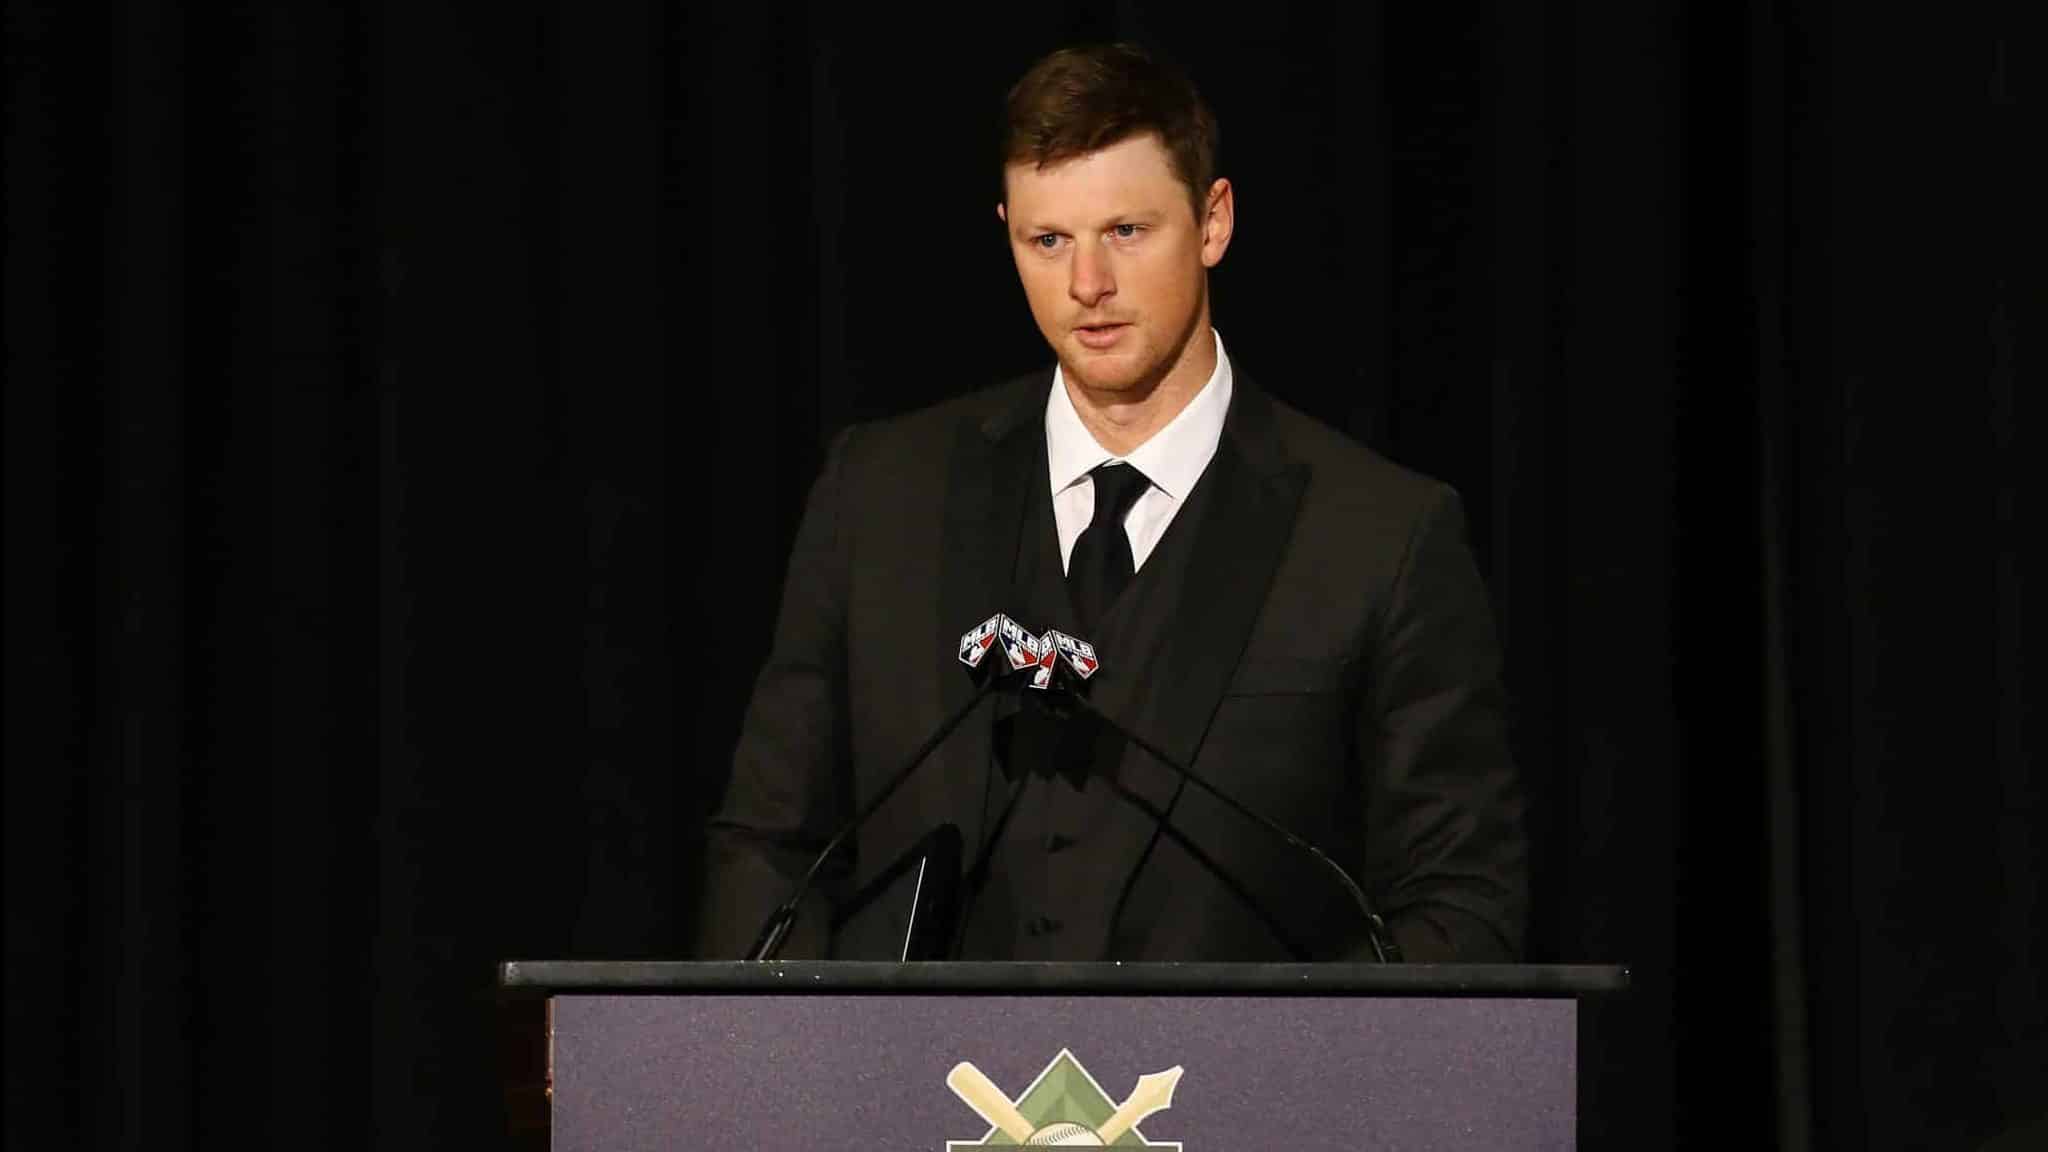 NEW YORK, NEW YORK - JANUARY 25: DJ LeMahieu of the New York Yankees speaks after receiving the Sid Mercer-Dick Young 